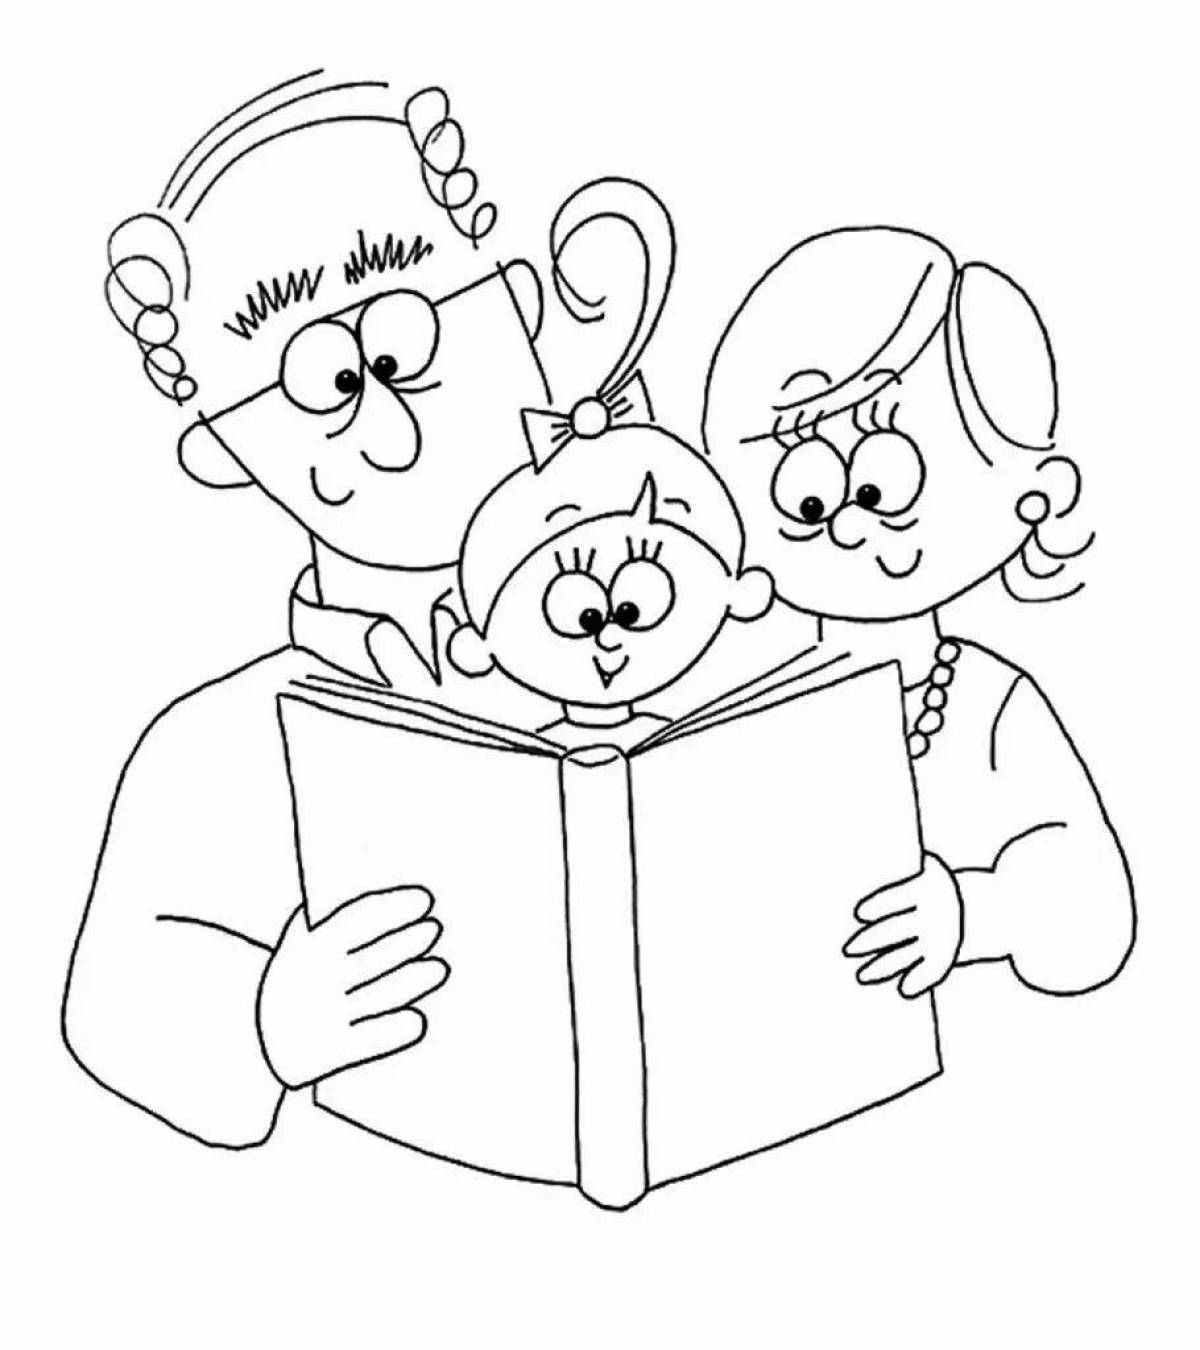 Great coloring pages for grandparents for kids